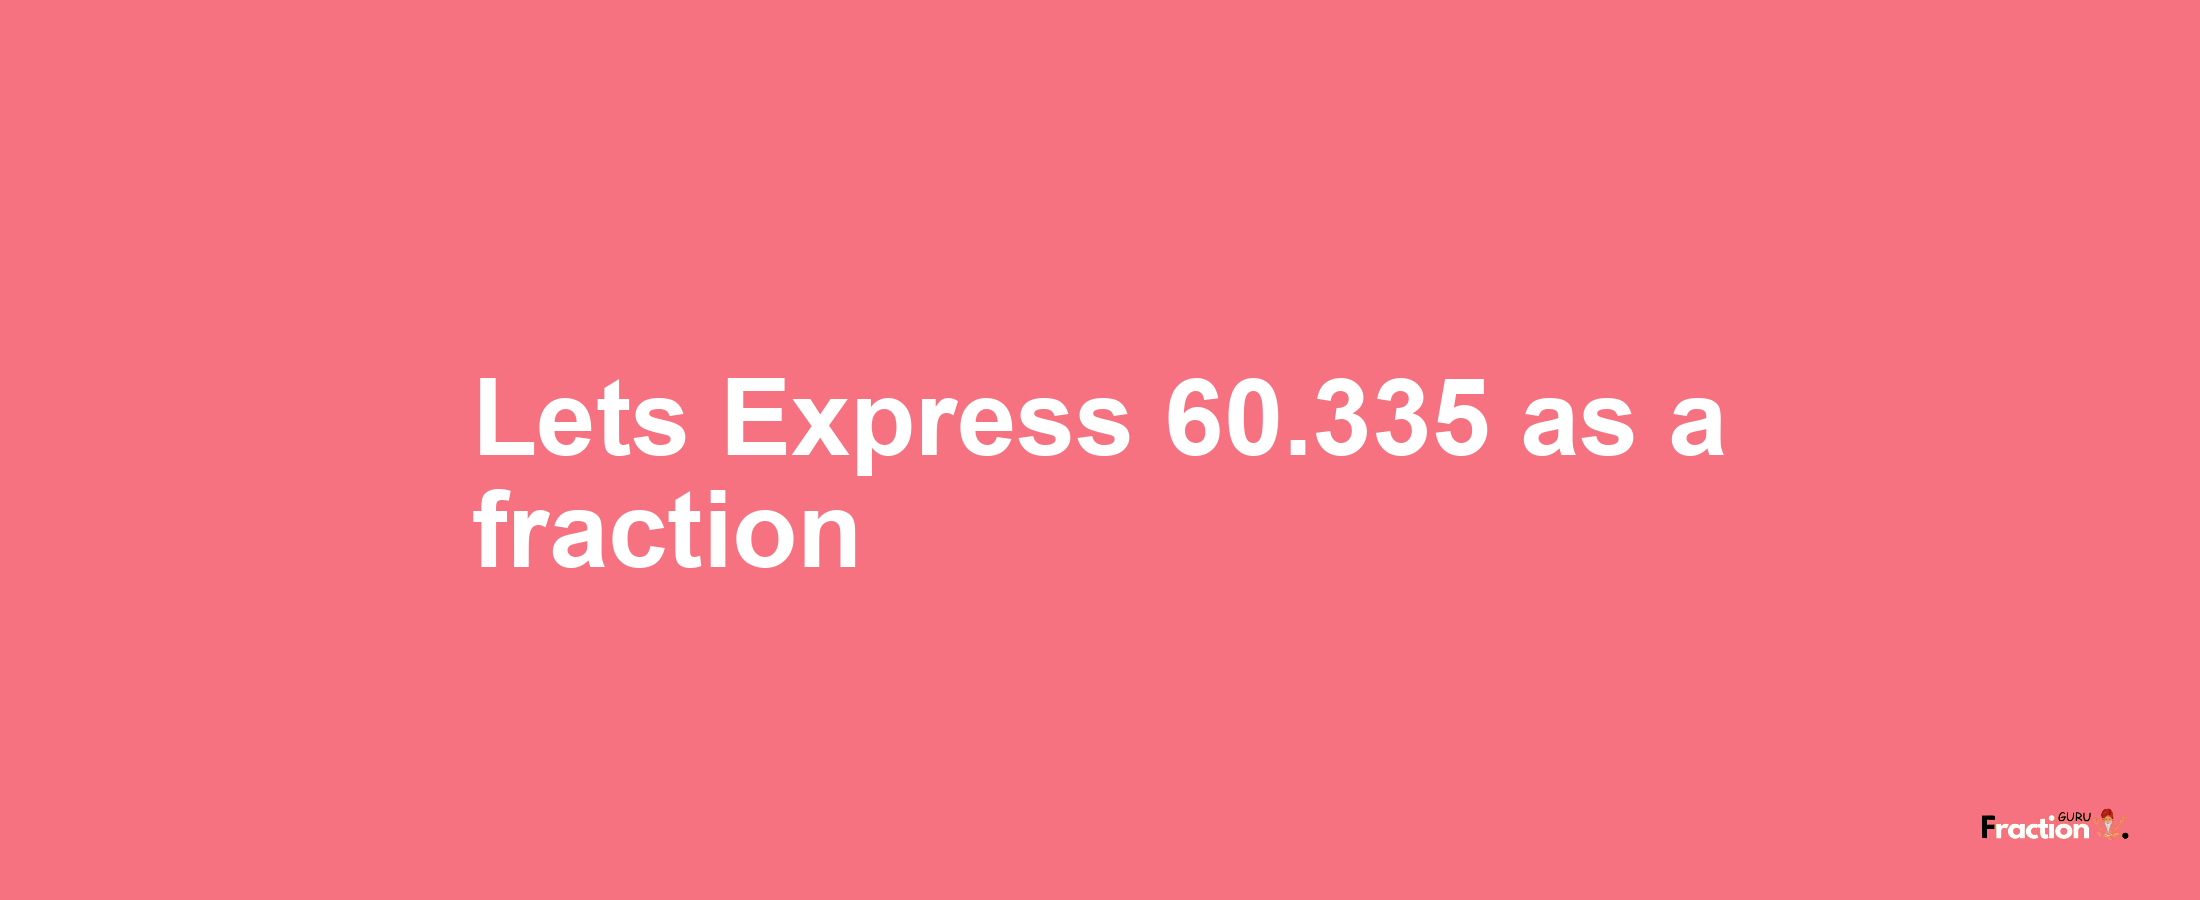 Lets Express 60.335 as afraction